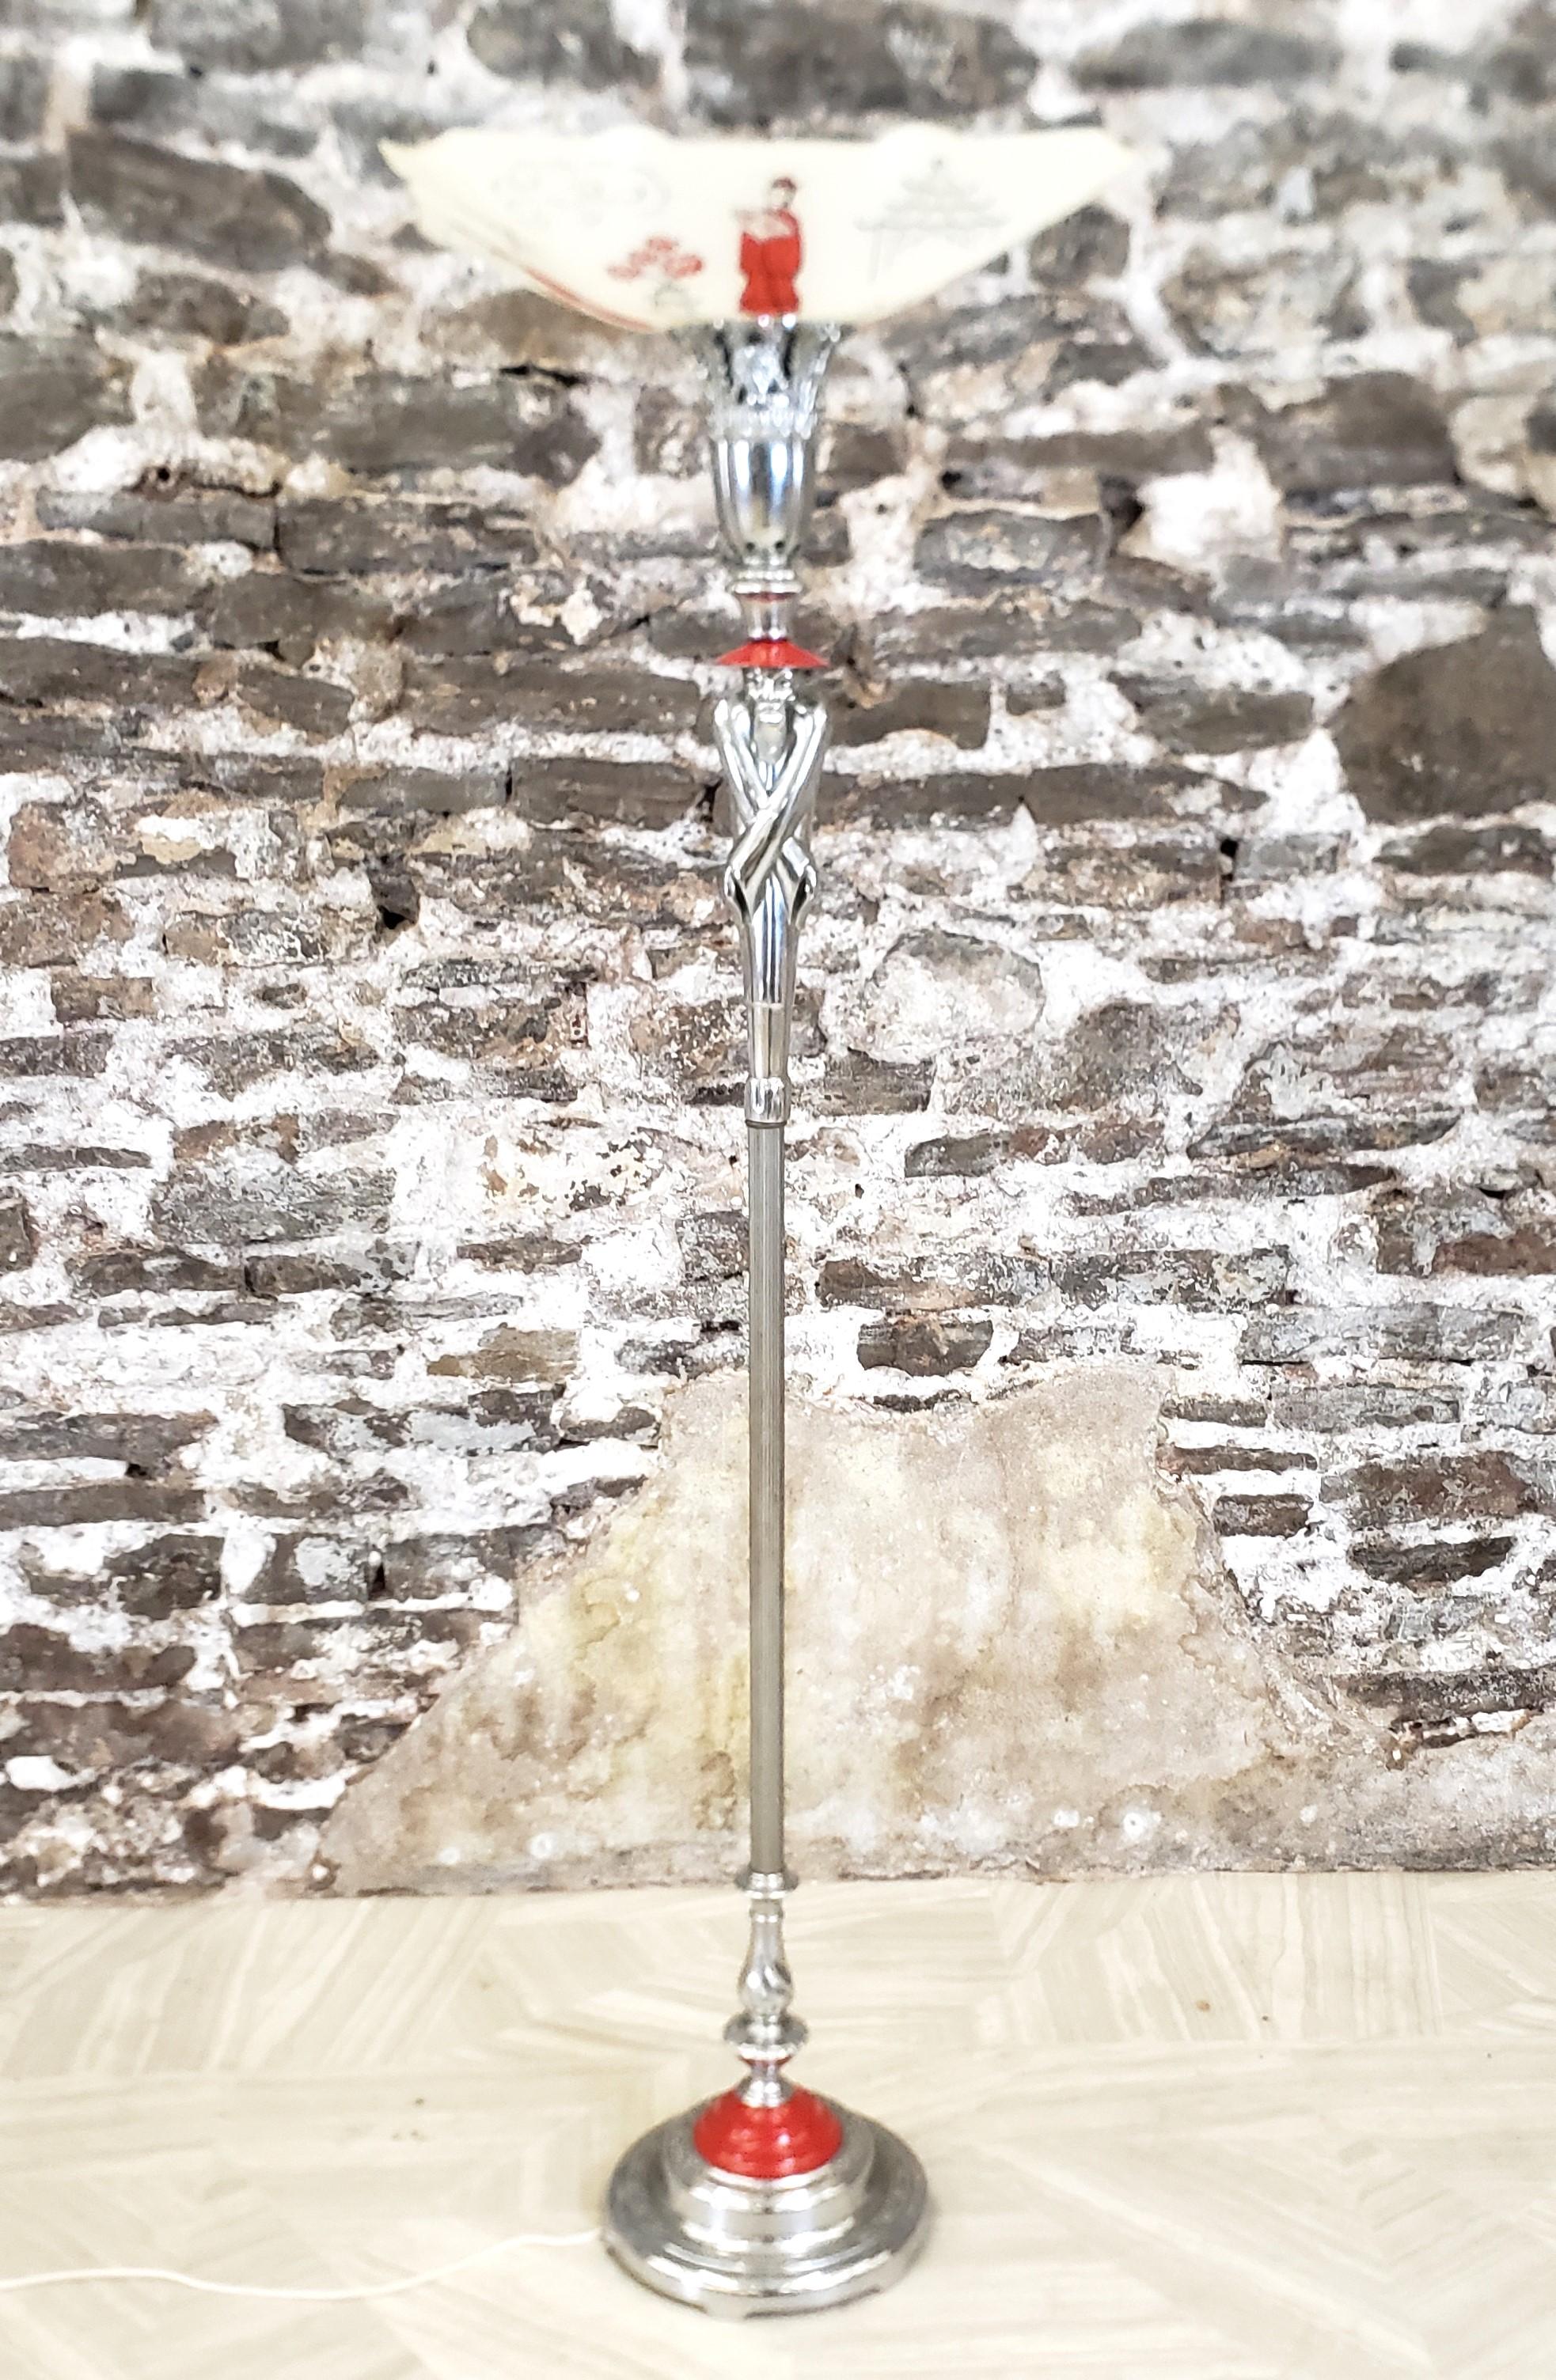 This antique torchiere floor lamp is unsigned with respect to the maker, but presumed to have originated from the United States and date to approximately 1920 and done in the period Art Deco style. The lamp base is composed of chromed metal and